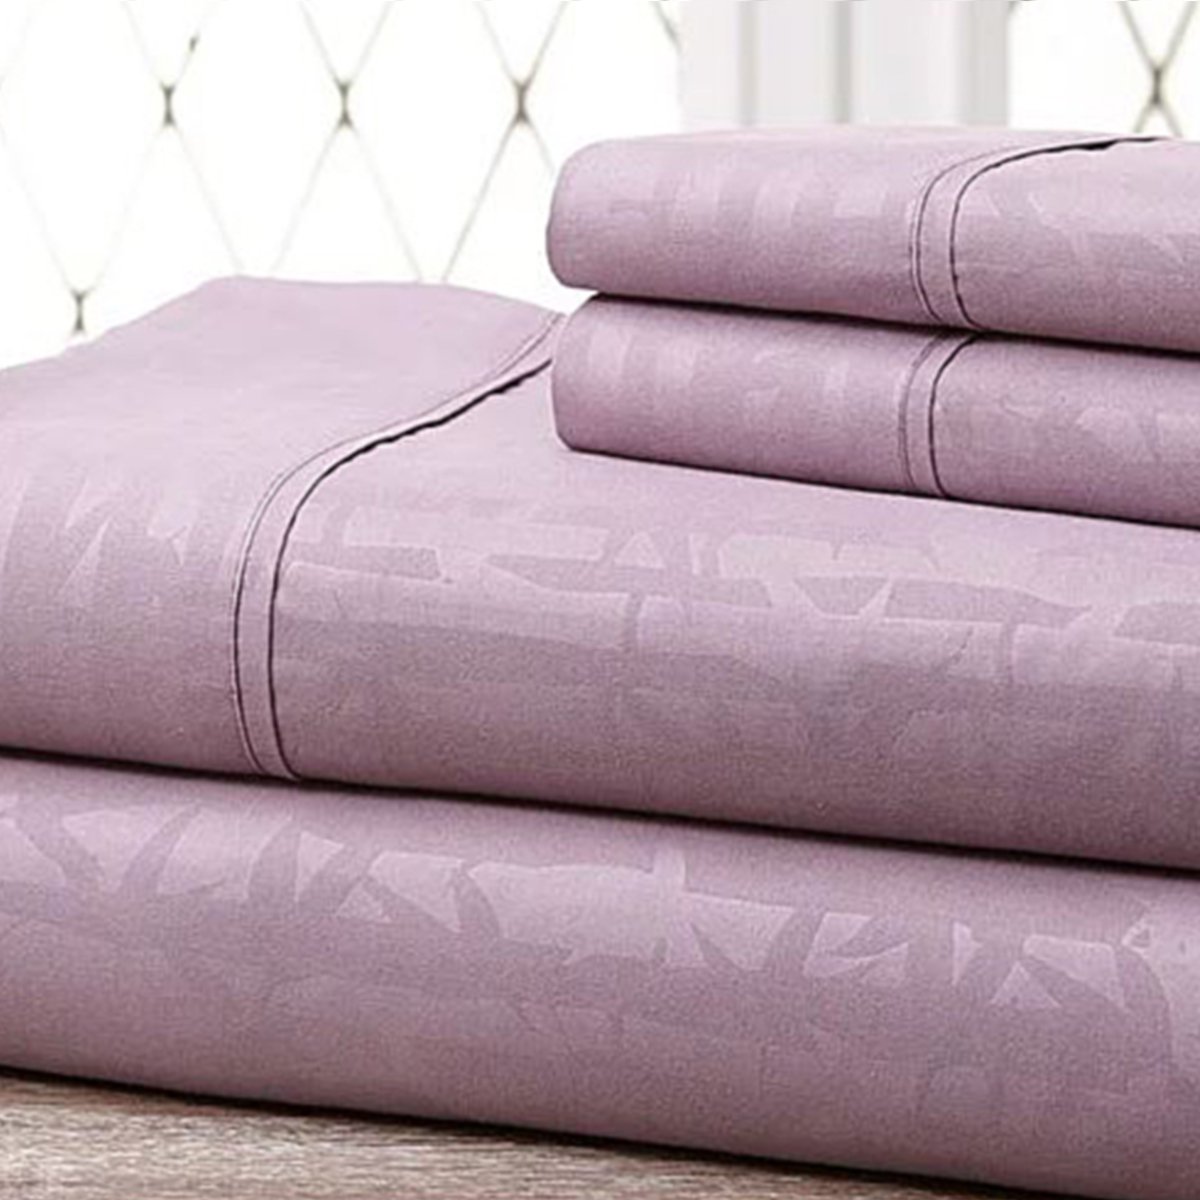 Super-soft 1600 Series Bamboo Embossed Bed Sheet, Lilac - King, 4 Piece